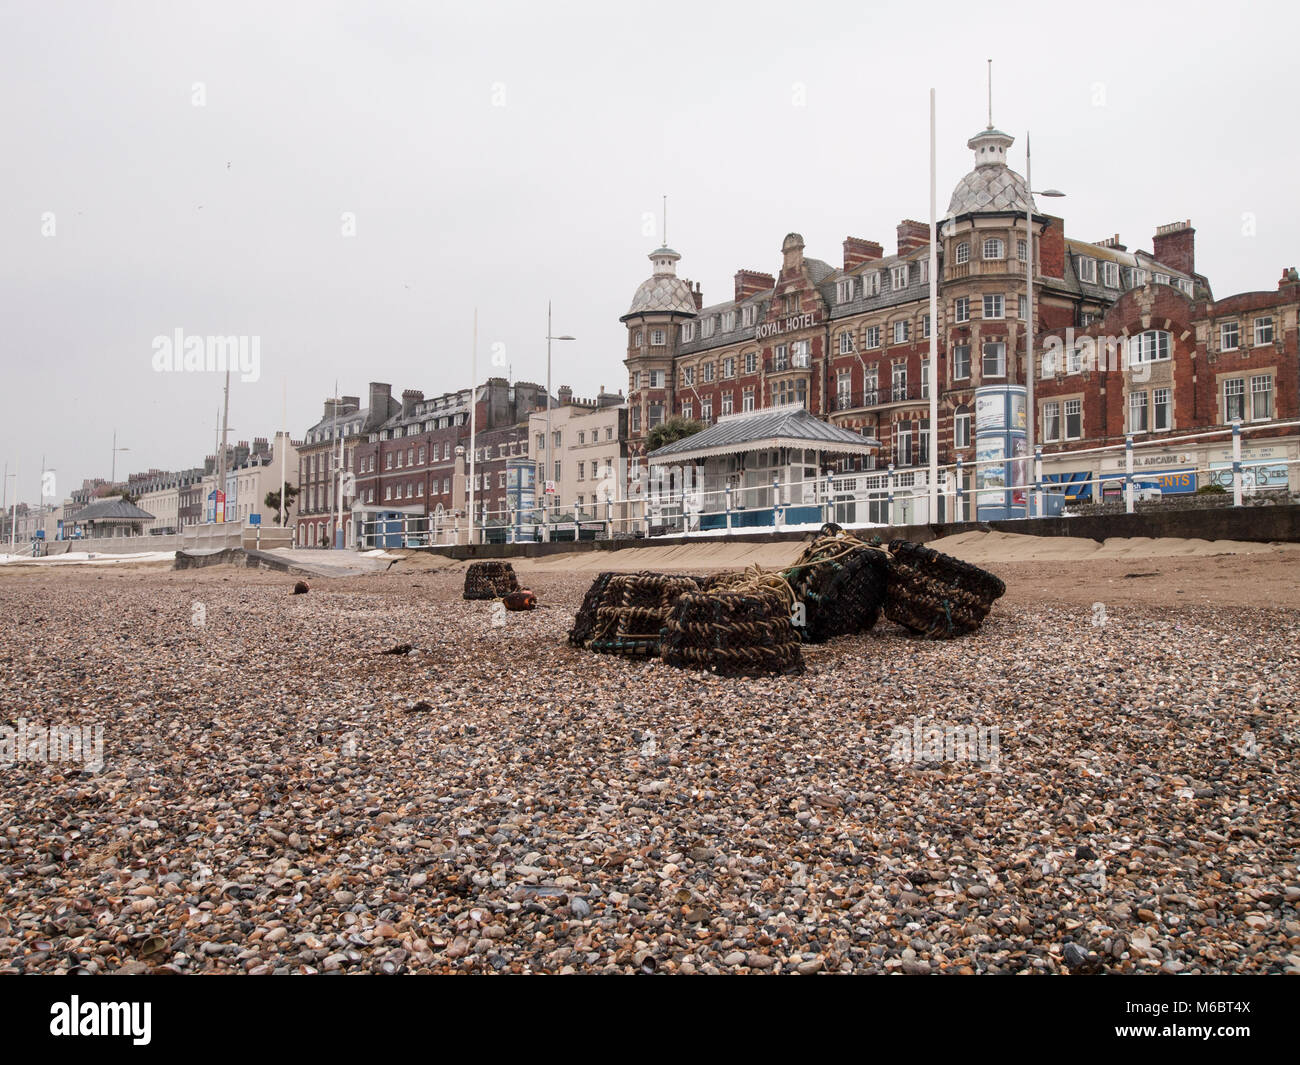 Lobster pots washed out on Weymouth beach. Royal hotel in the background Stock Photo